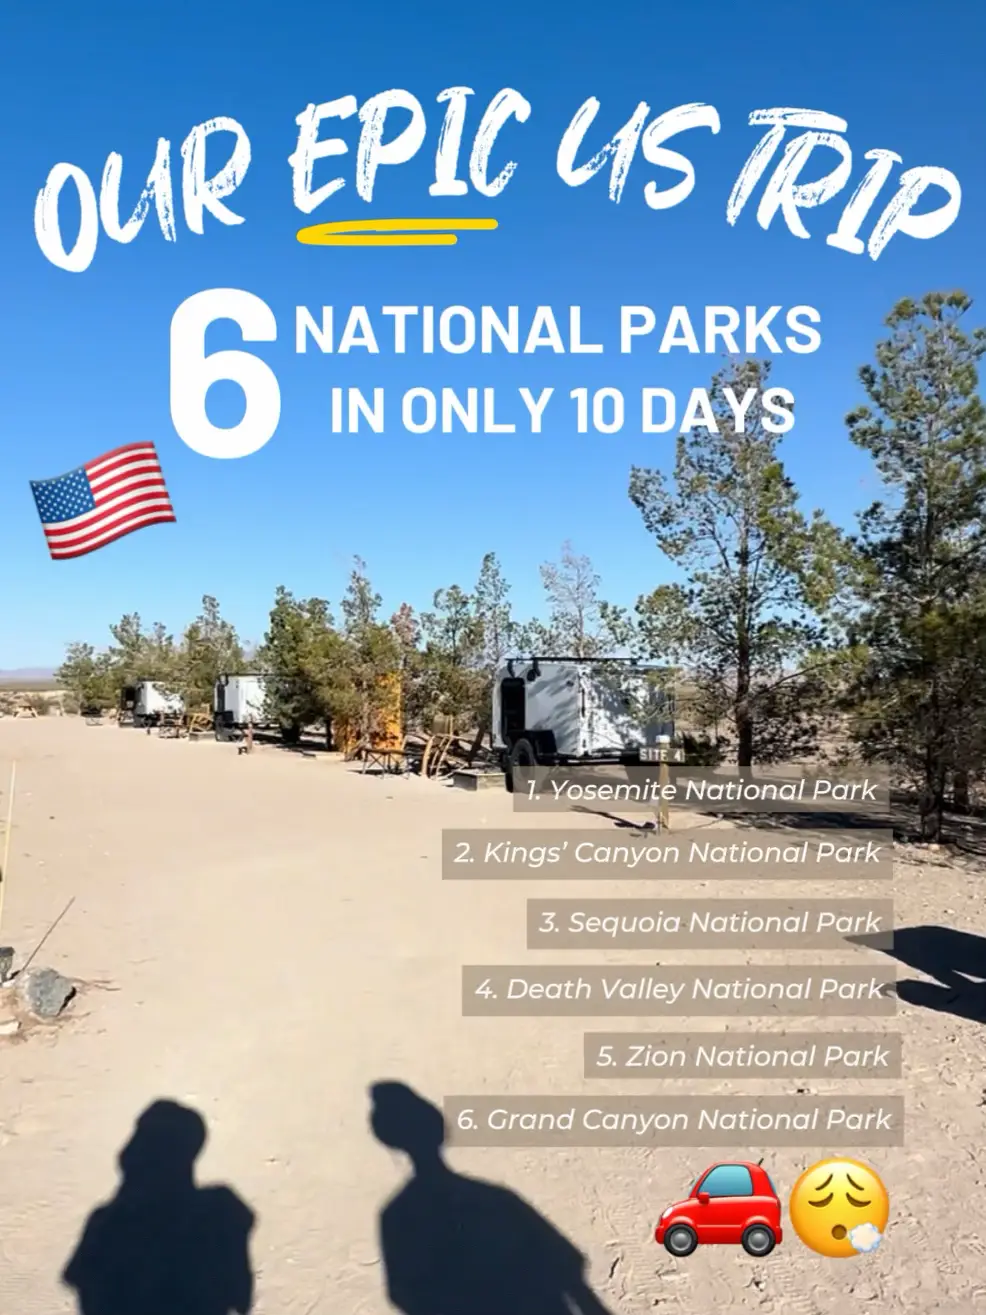 🇺🇸 OUR EPIC US TRIP: 6 National Parks in 10 DAYS!! 's images(0)